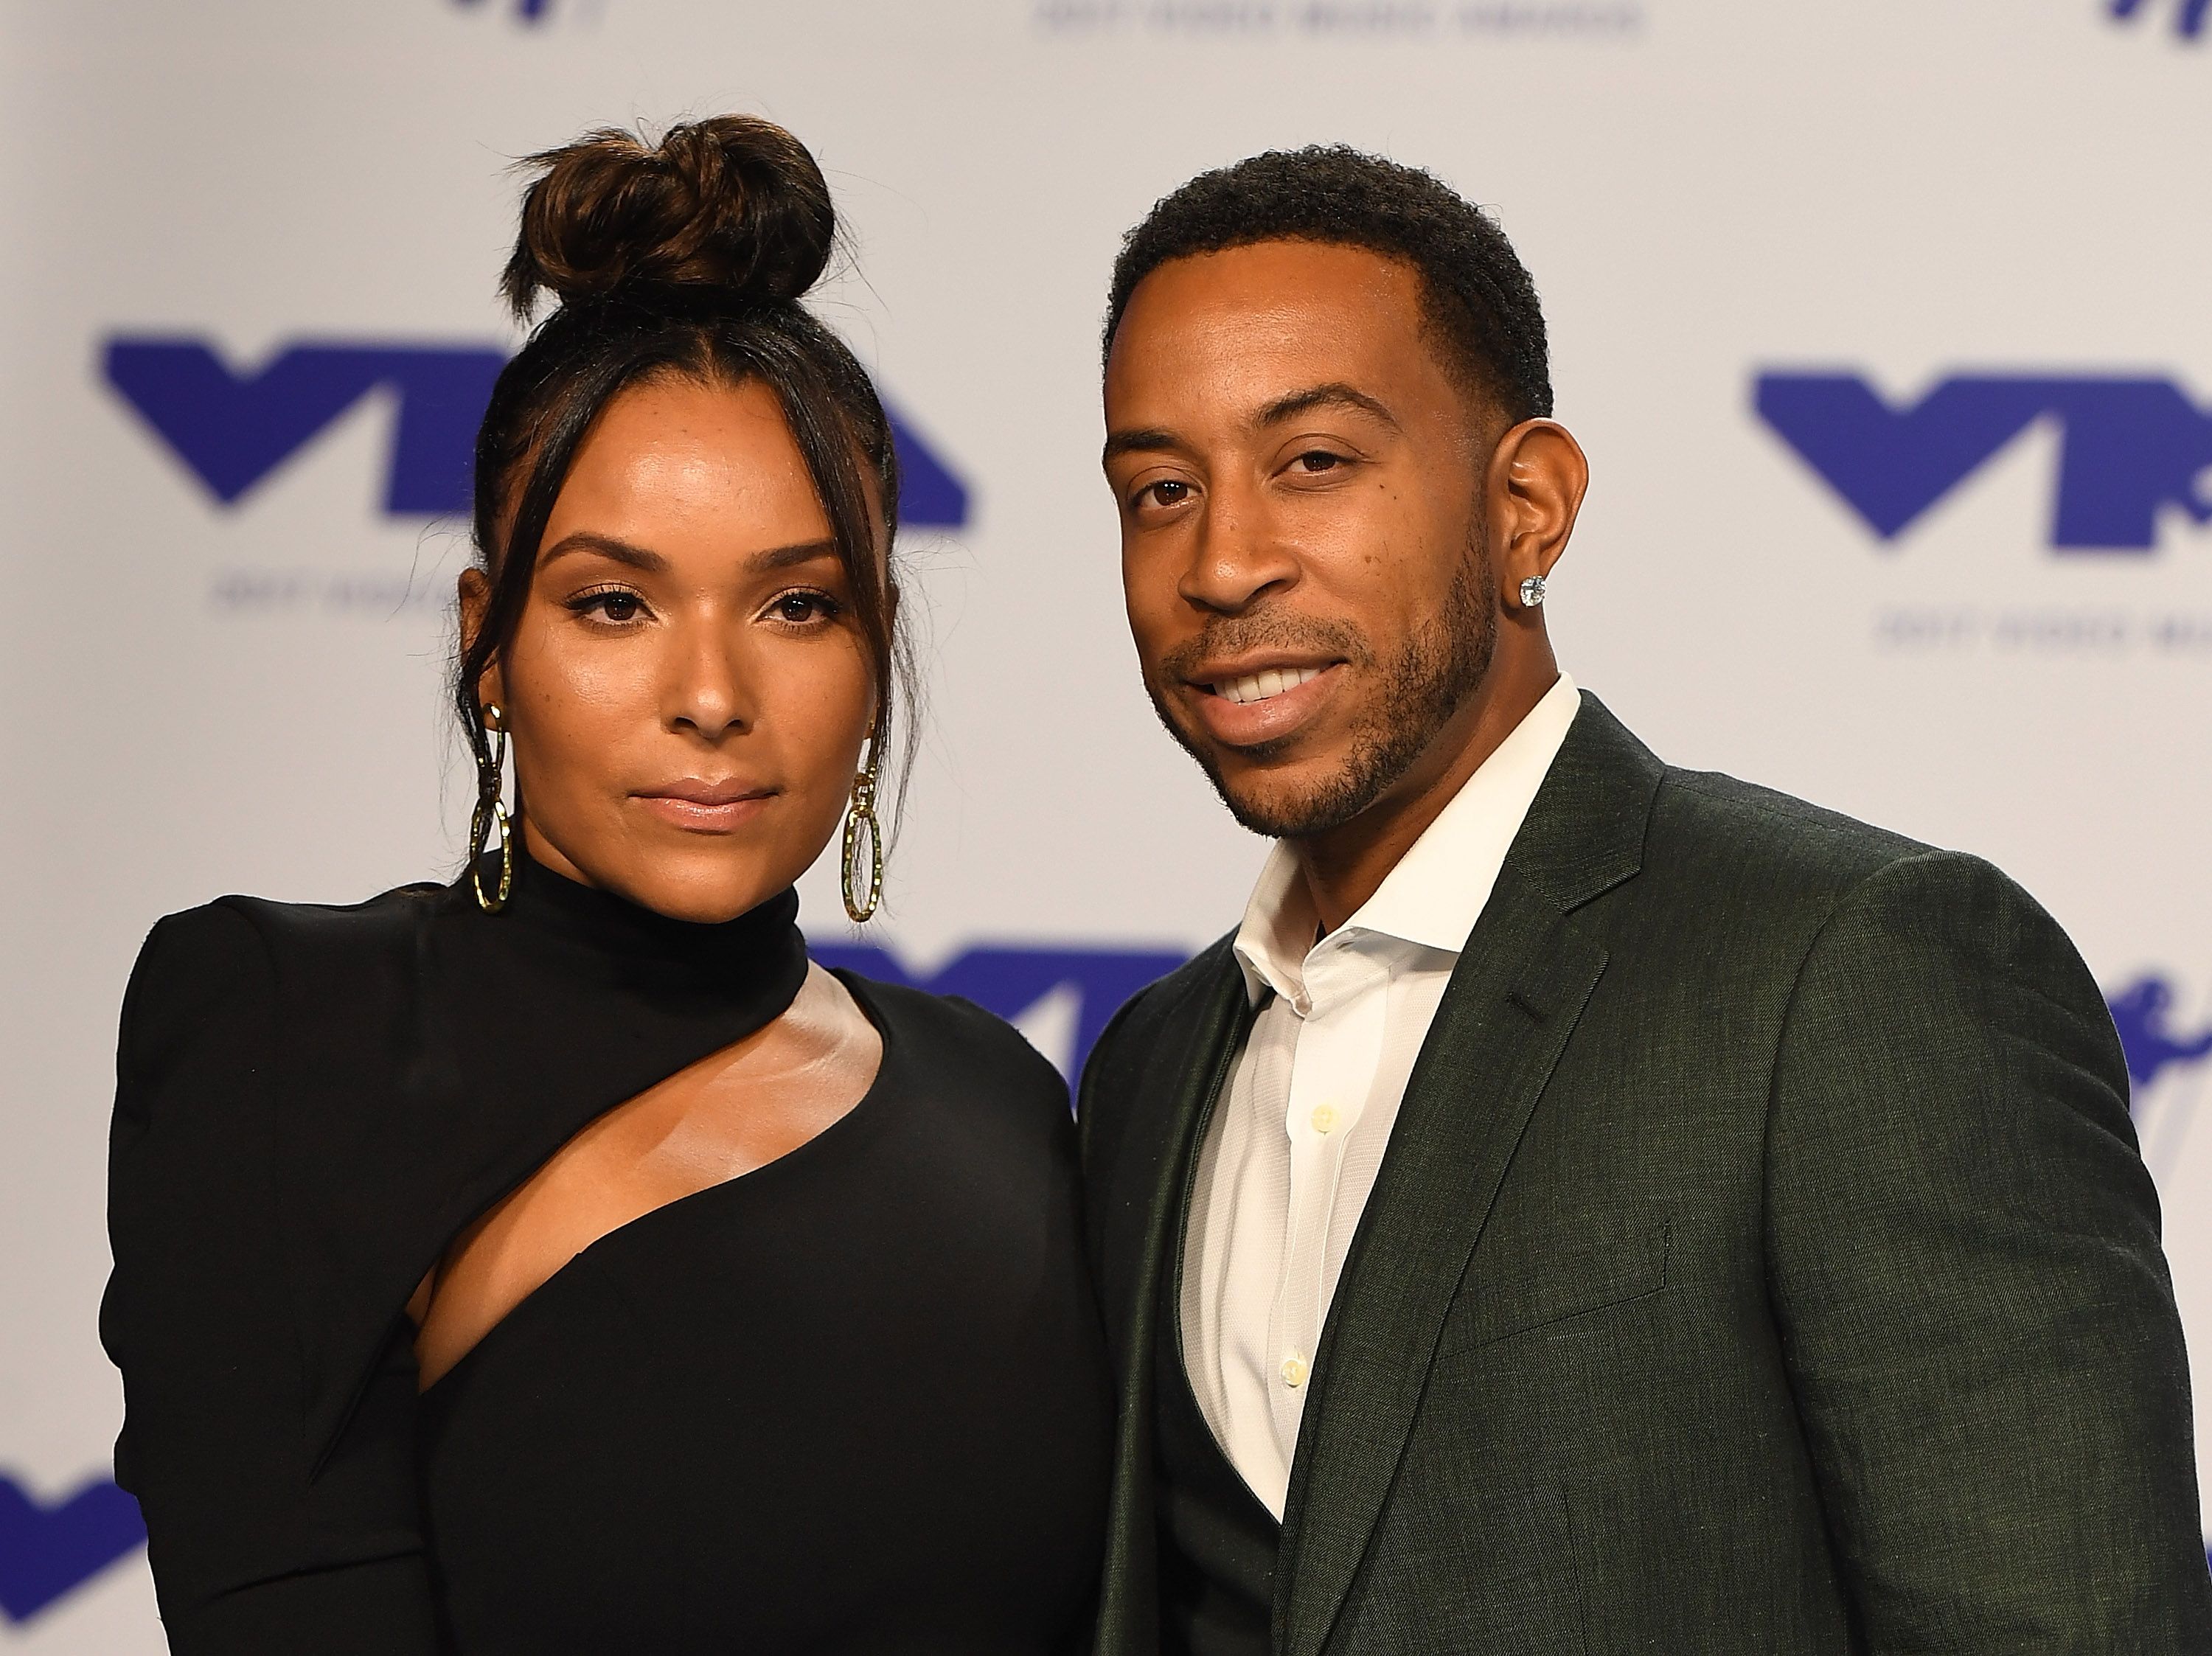 Ludacris and Eudoxie Mbouguiengue during the 2017 MTV Video Music Awards at The Forum on August 27, 2017 in Inglewood, California.| Source: Getty Images